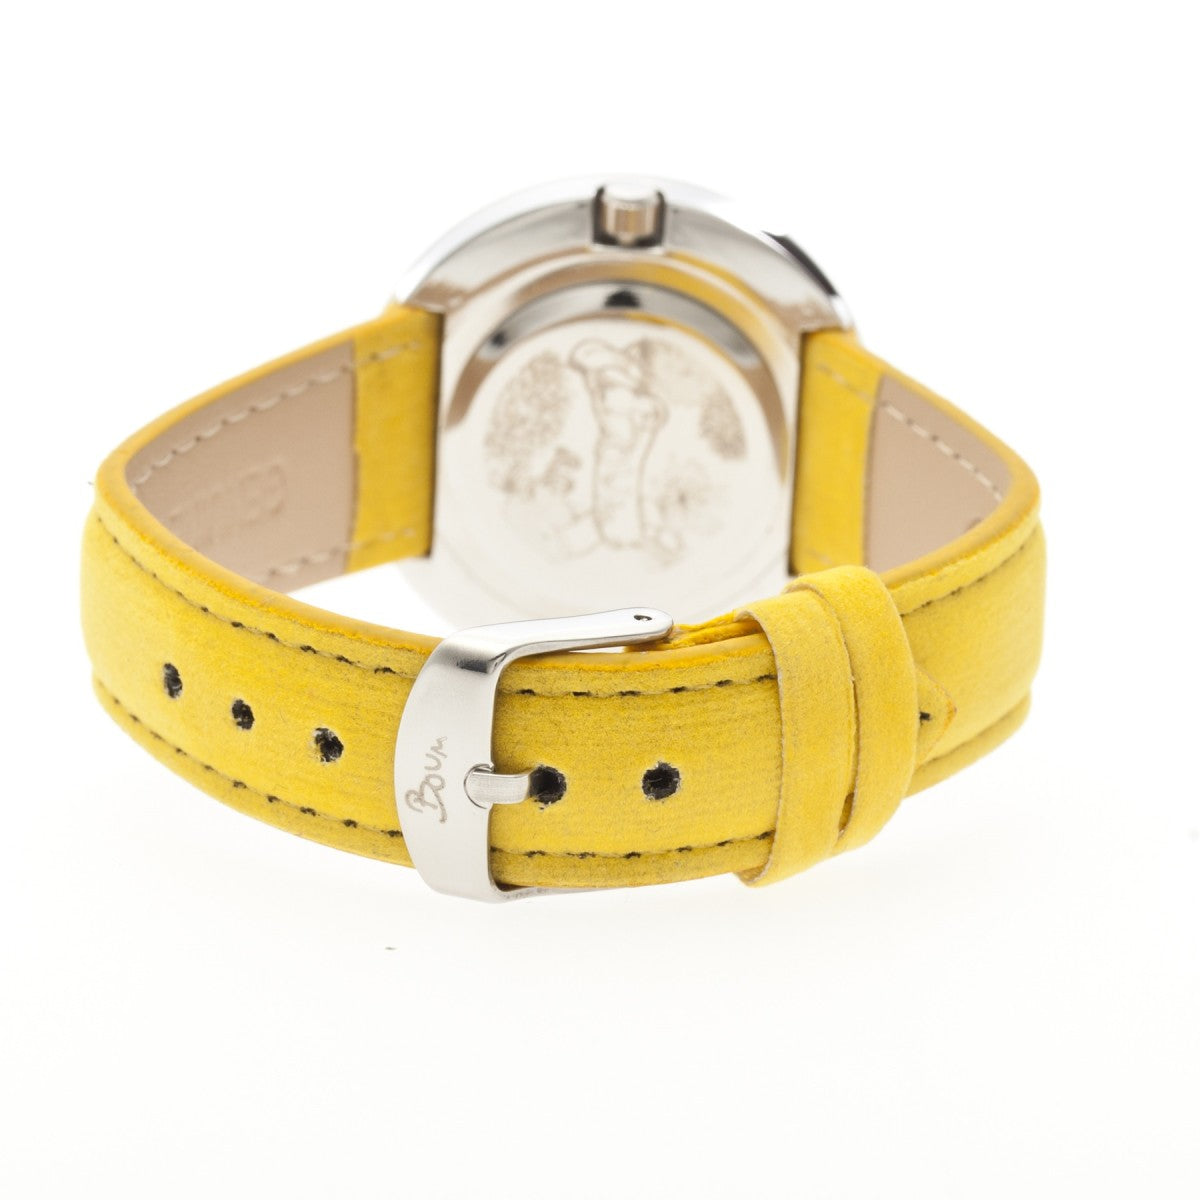 Boum Bouquet Floral-Ring Leather-Band Ladies Watch - Yellow - BOUBM2807